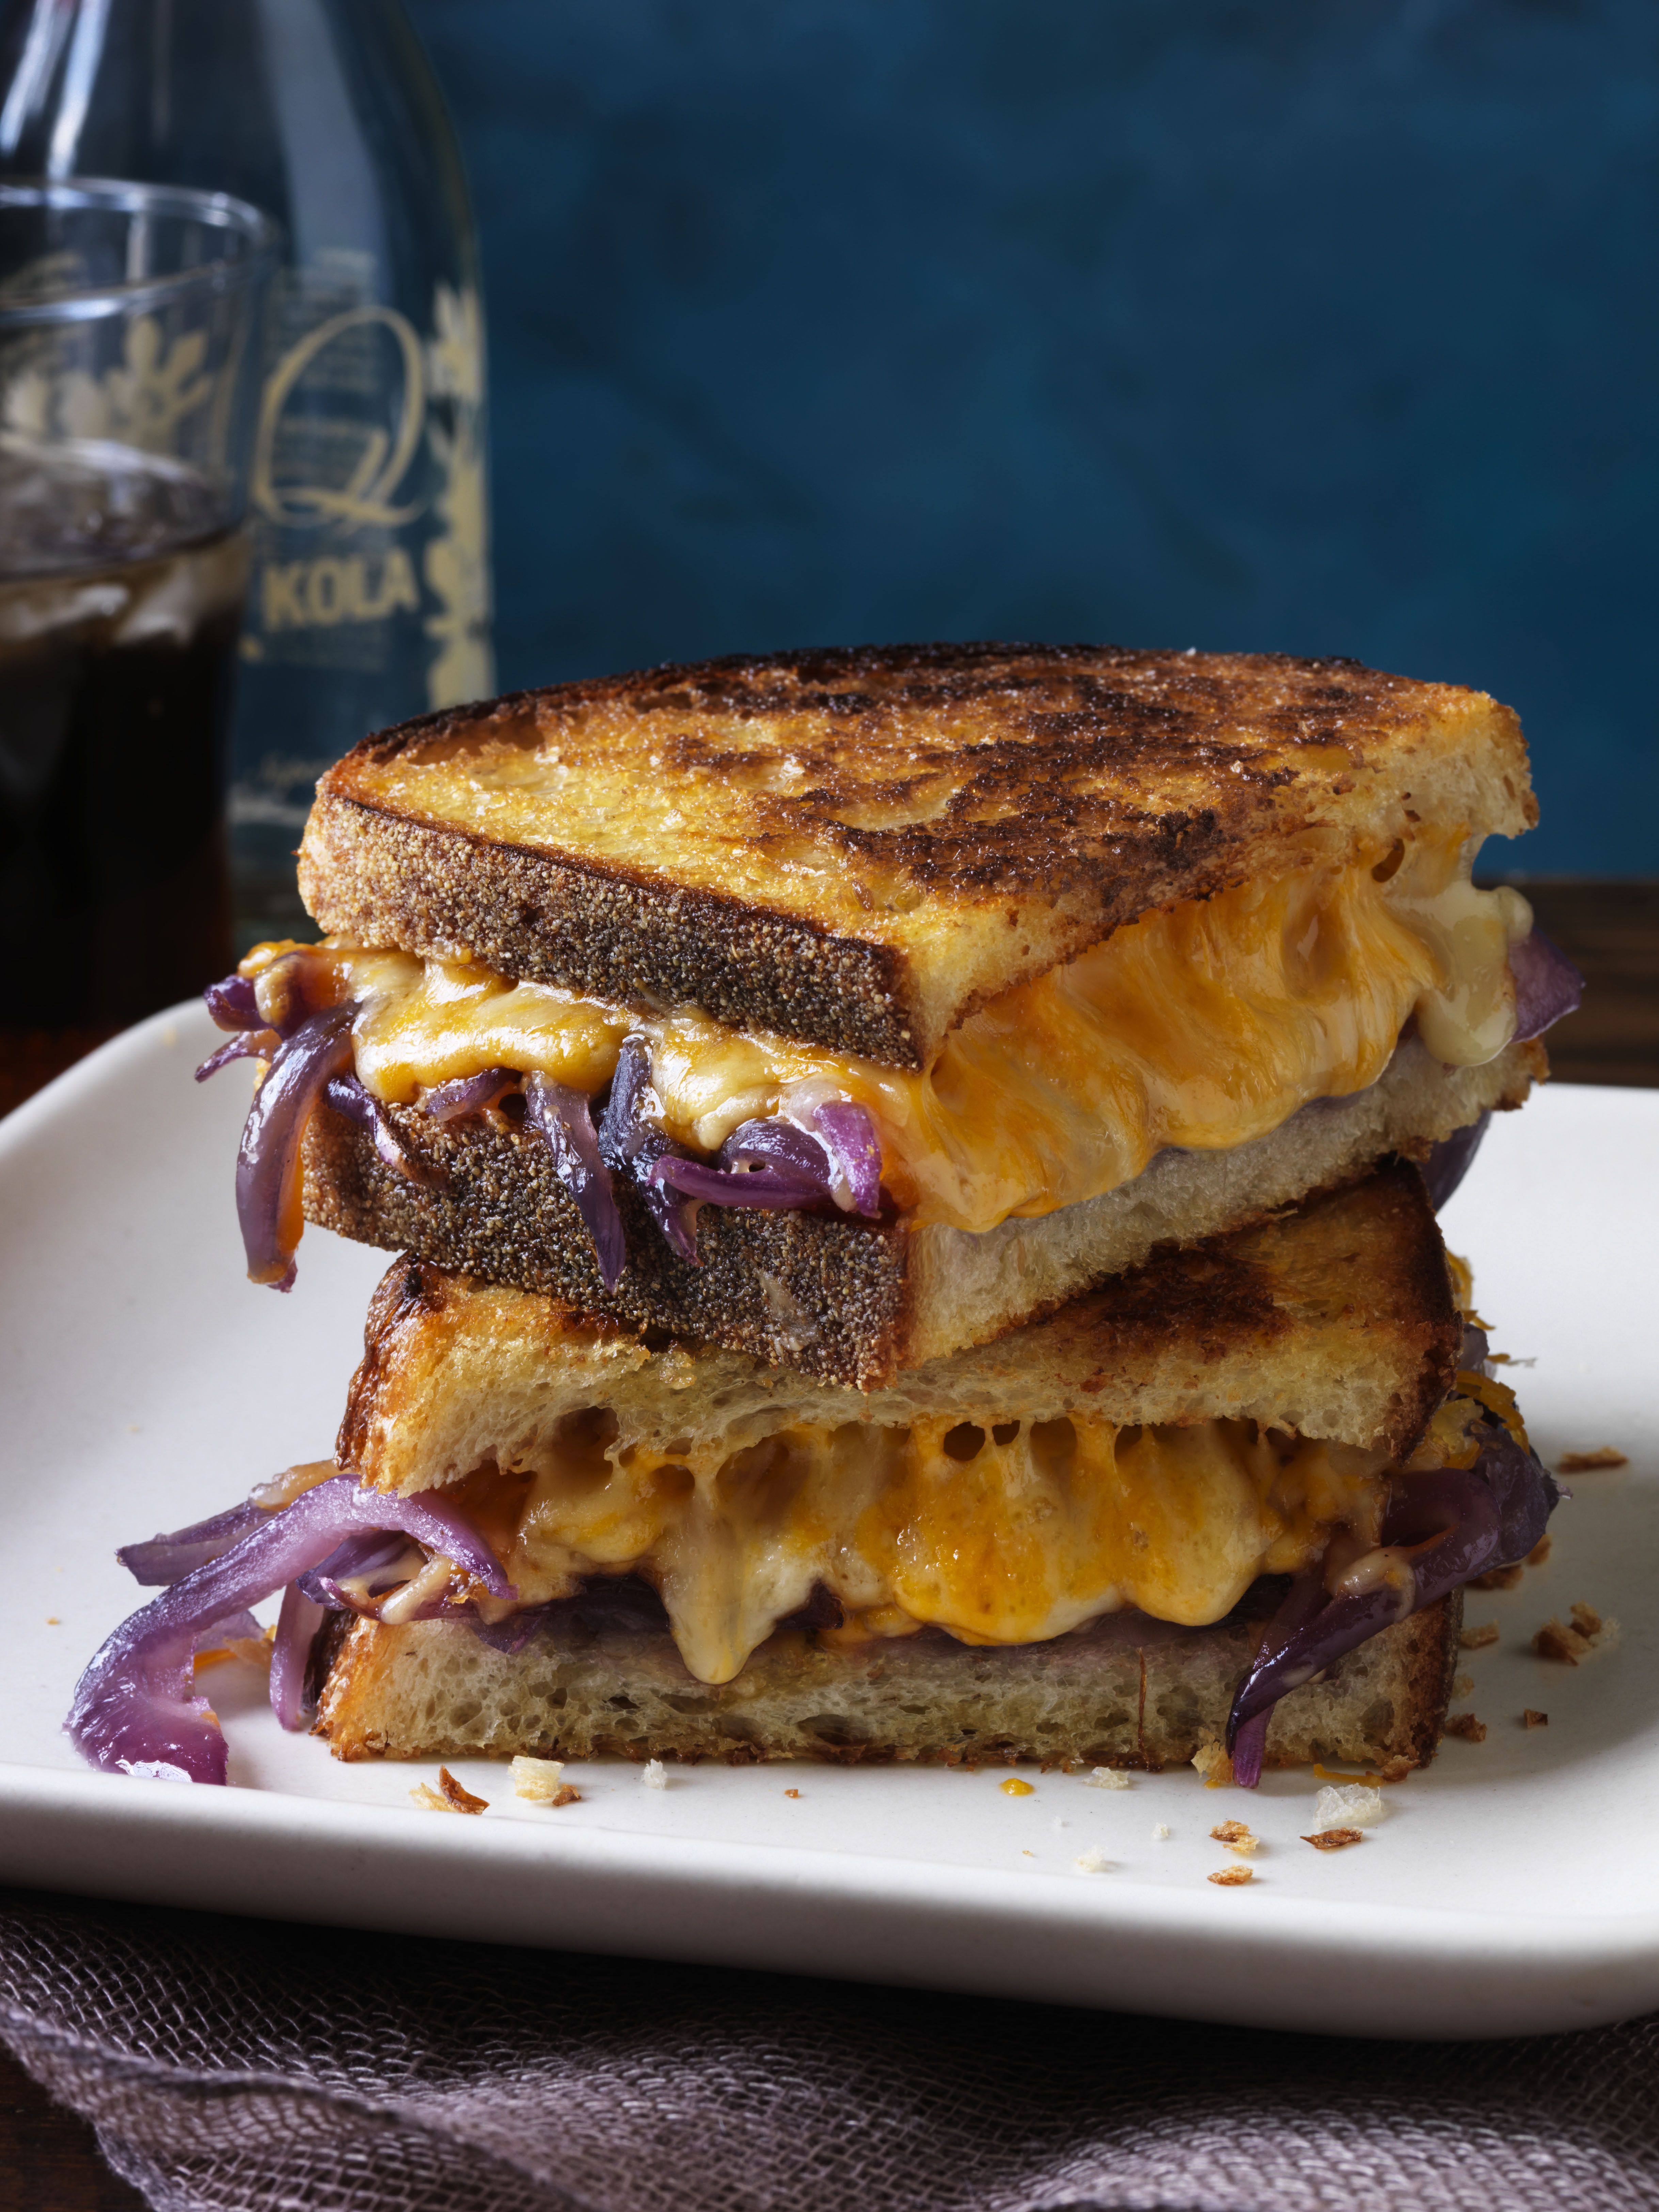 https://hips.hearstapps.com/hmg-prod/images/grilled-cheese-with-bourbon-melted-onions-1609255106.jpg